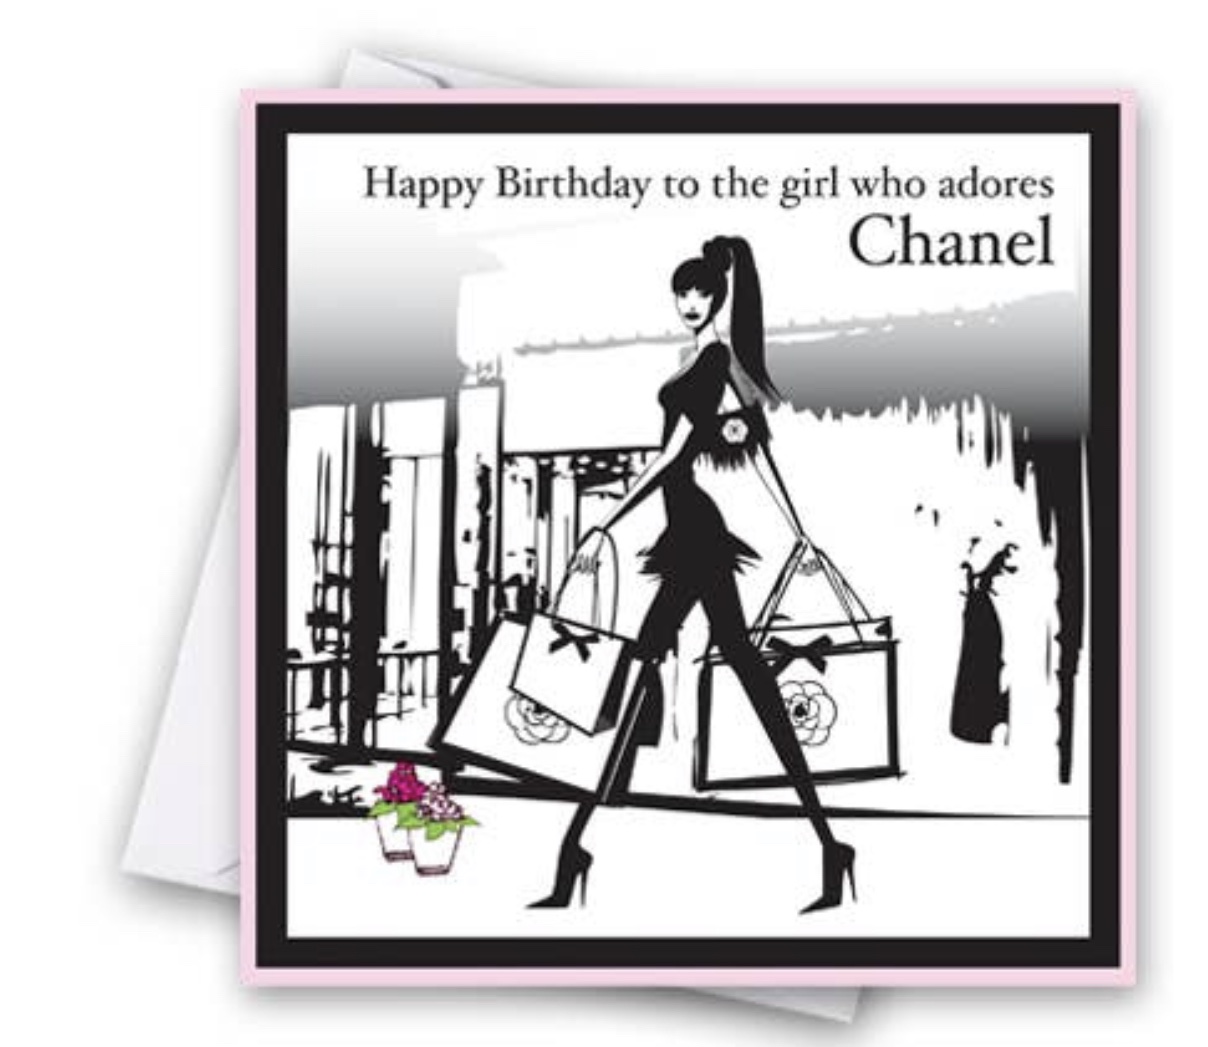 Amazoncom  SingleCoco Chanel Wearing an LBD Greeting Card  Office  Products